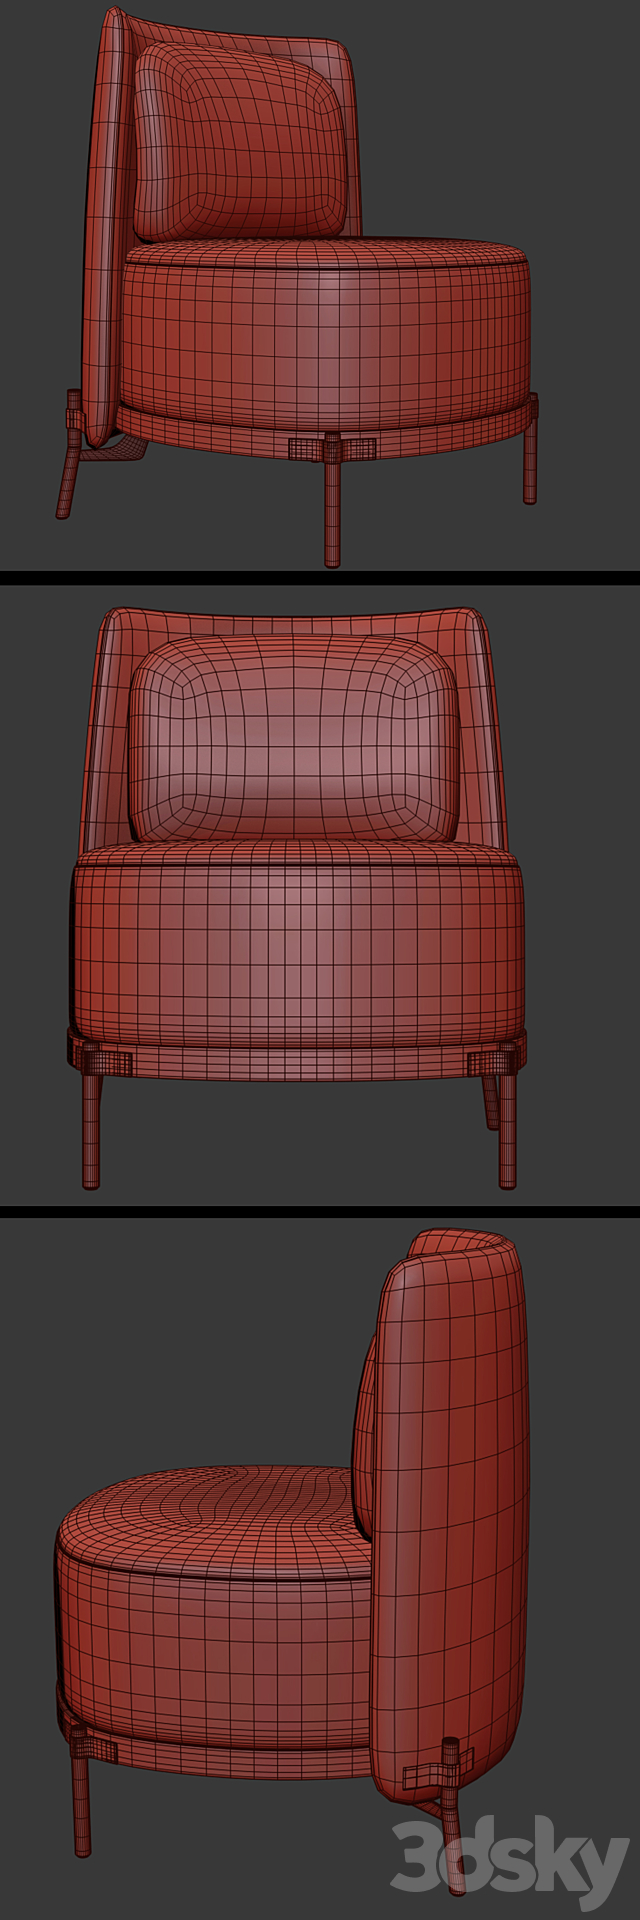 Minotti Tape Armless Chair With Table 3DSMax File - thumbnail 3